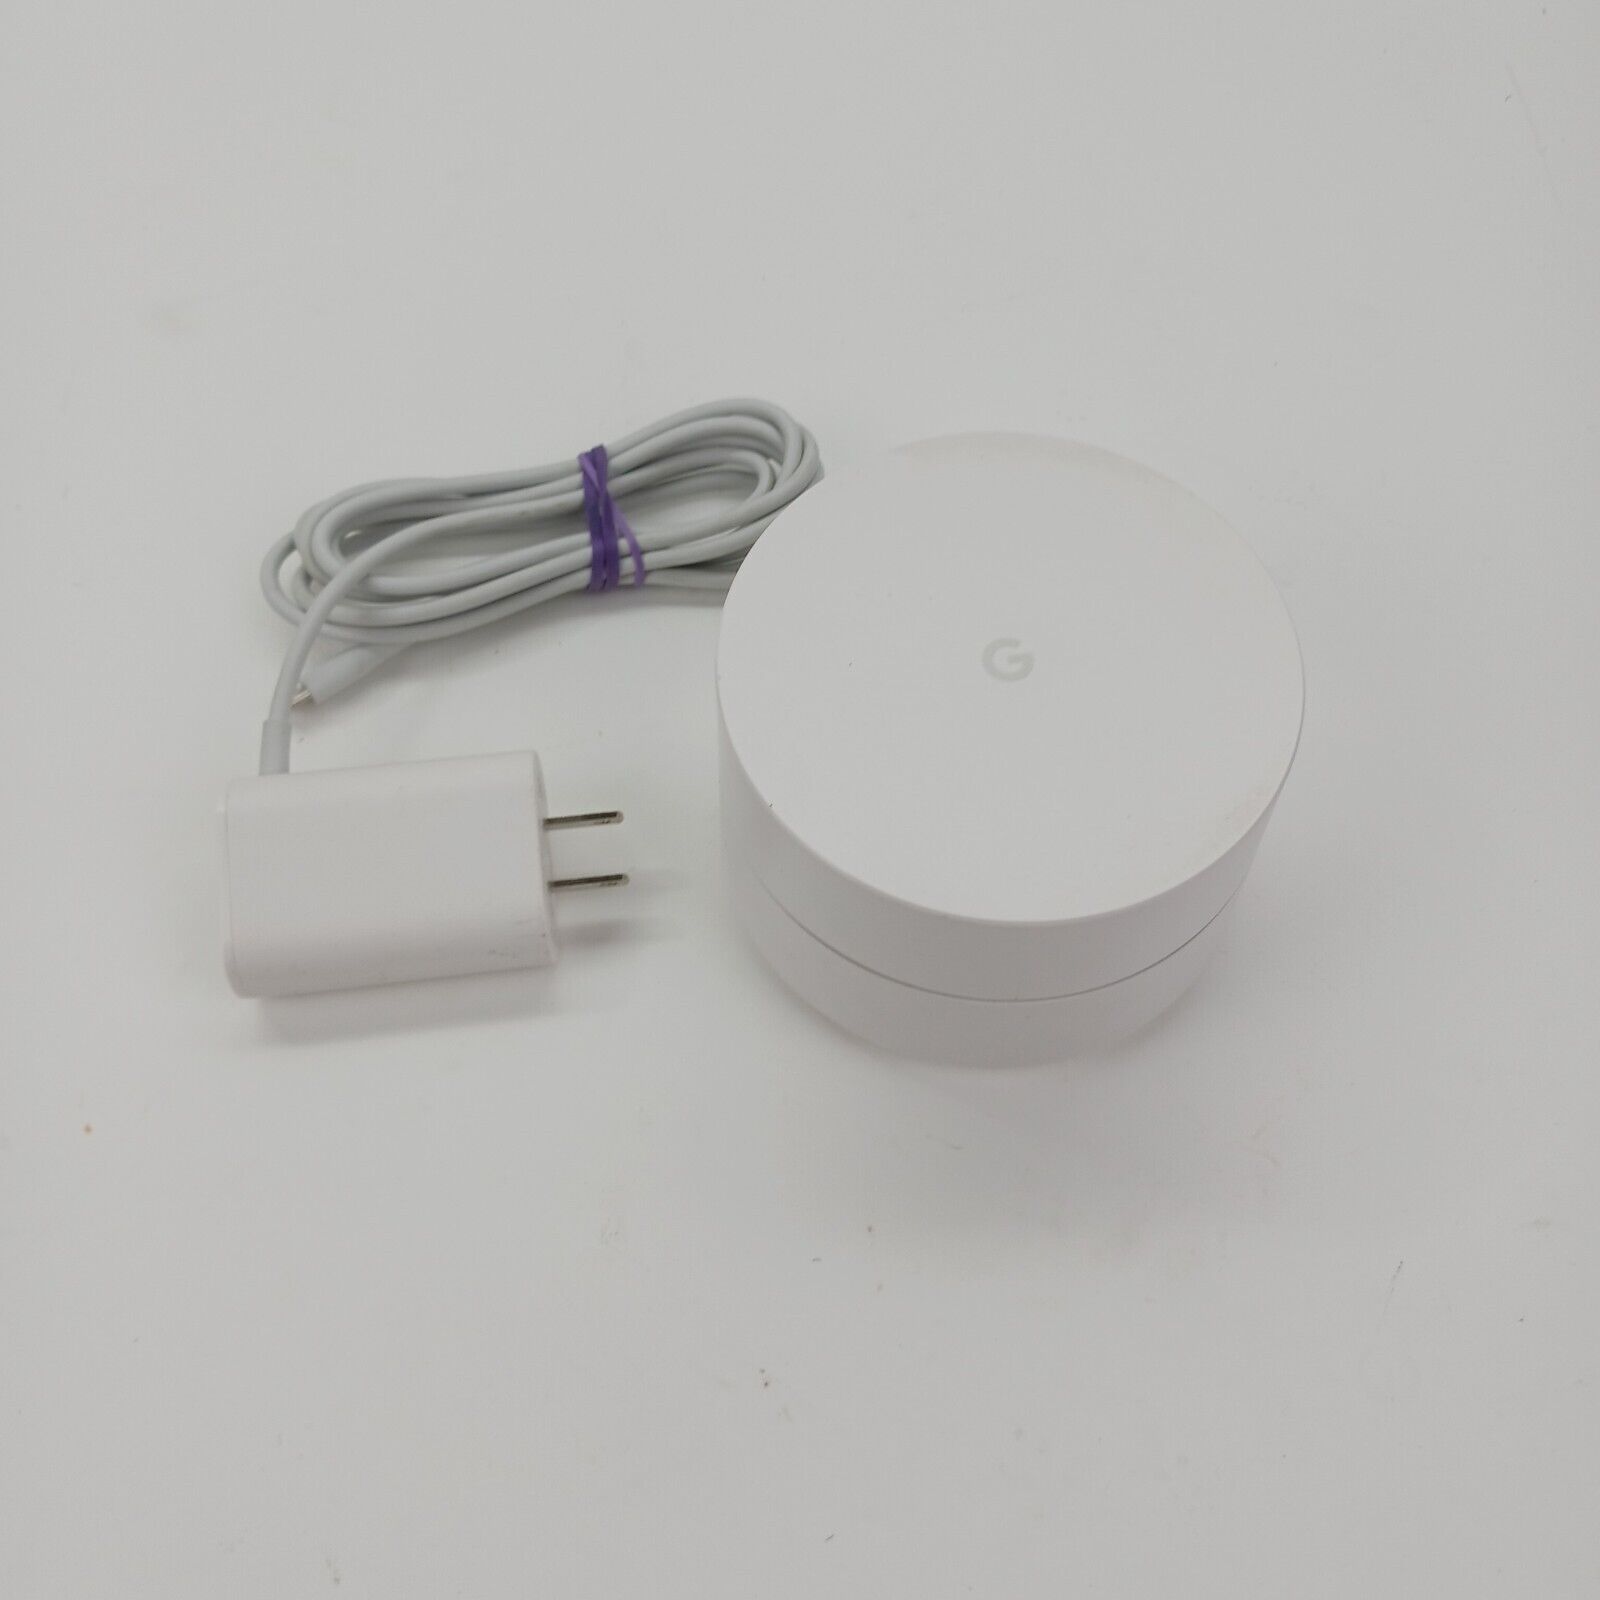 Google AC-1304 Wireless Dual Band Gigabit Router with High Speed Connectivity